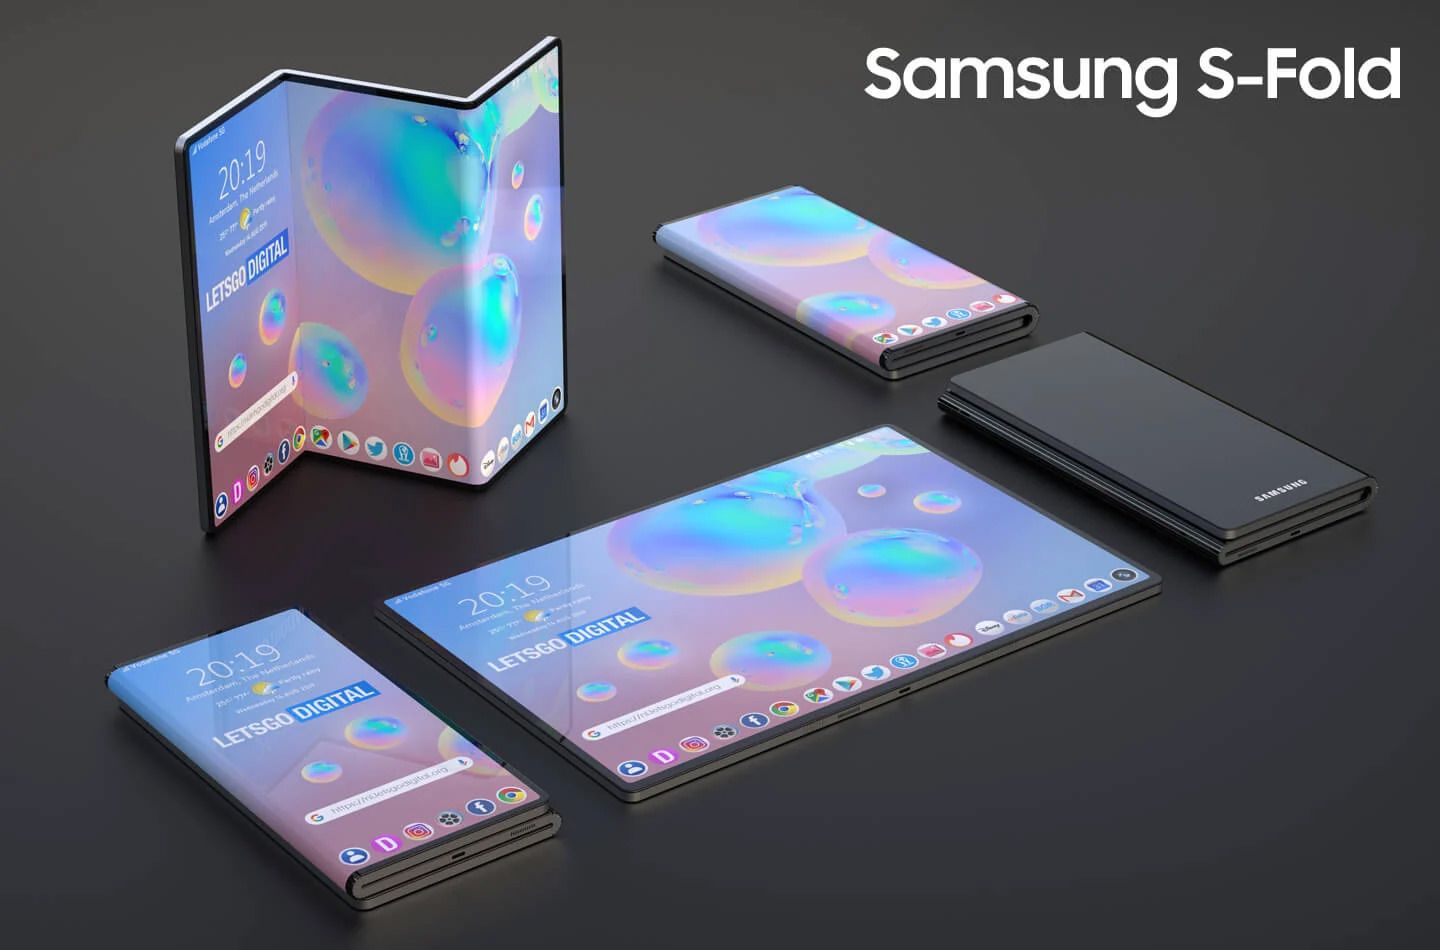 Conceptual design of Samsung clamshell phone